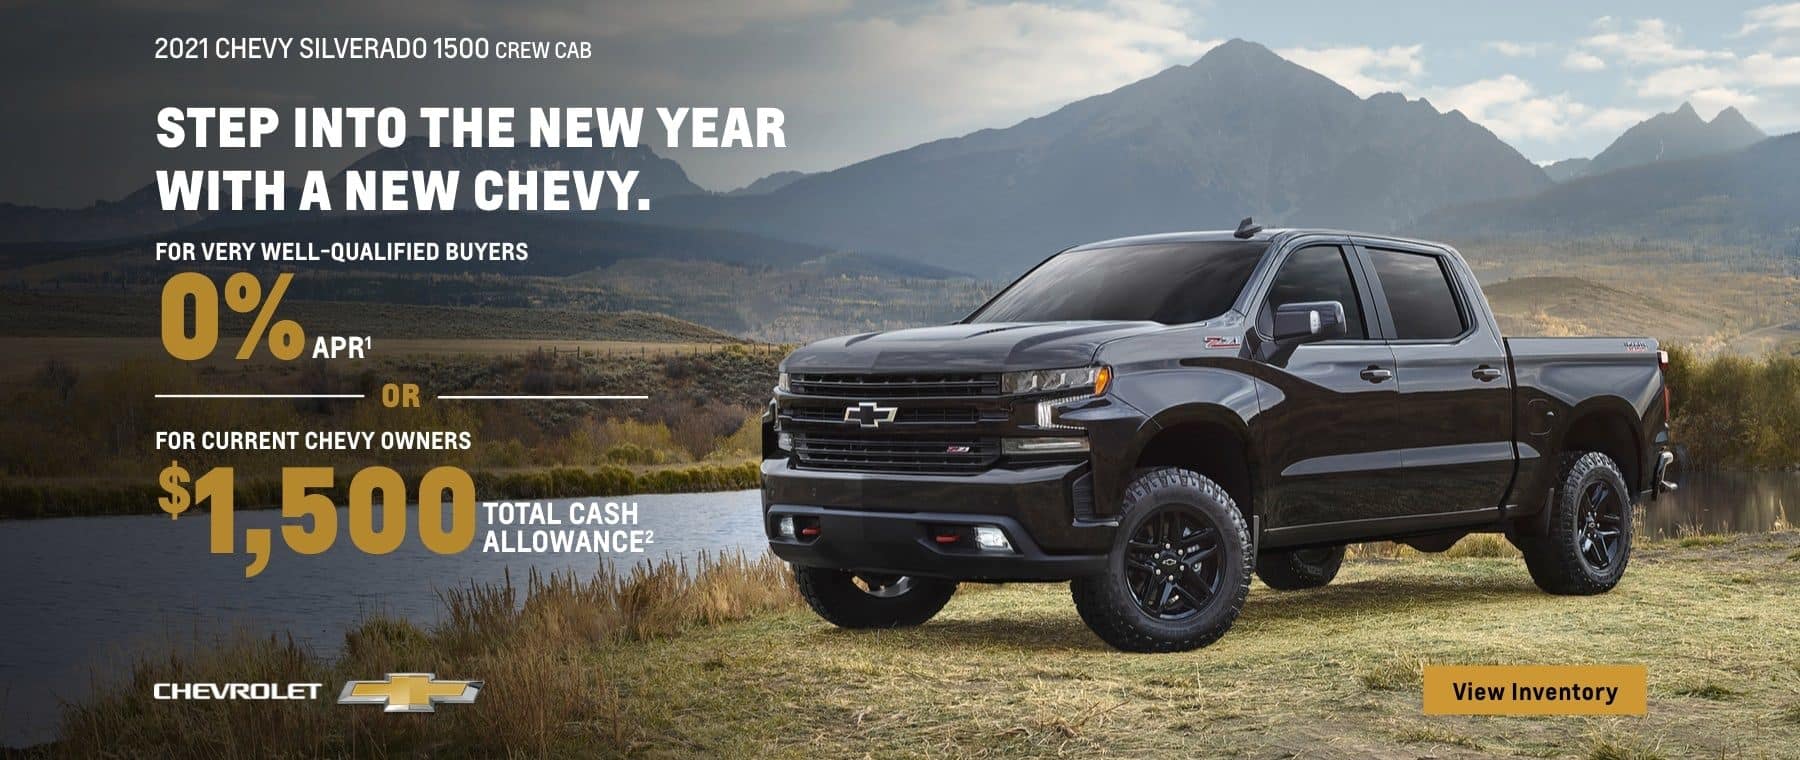 2021 Chevy Silverado 1500 Crew Cab. Step into the new year with a new Chevy. For very well-qualified buyers 0% APR. Or, for current Chevy owners $1,500 total cash allowance.